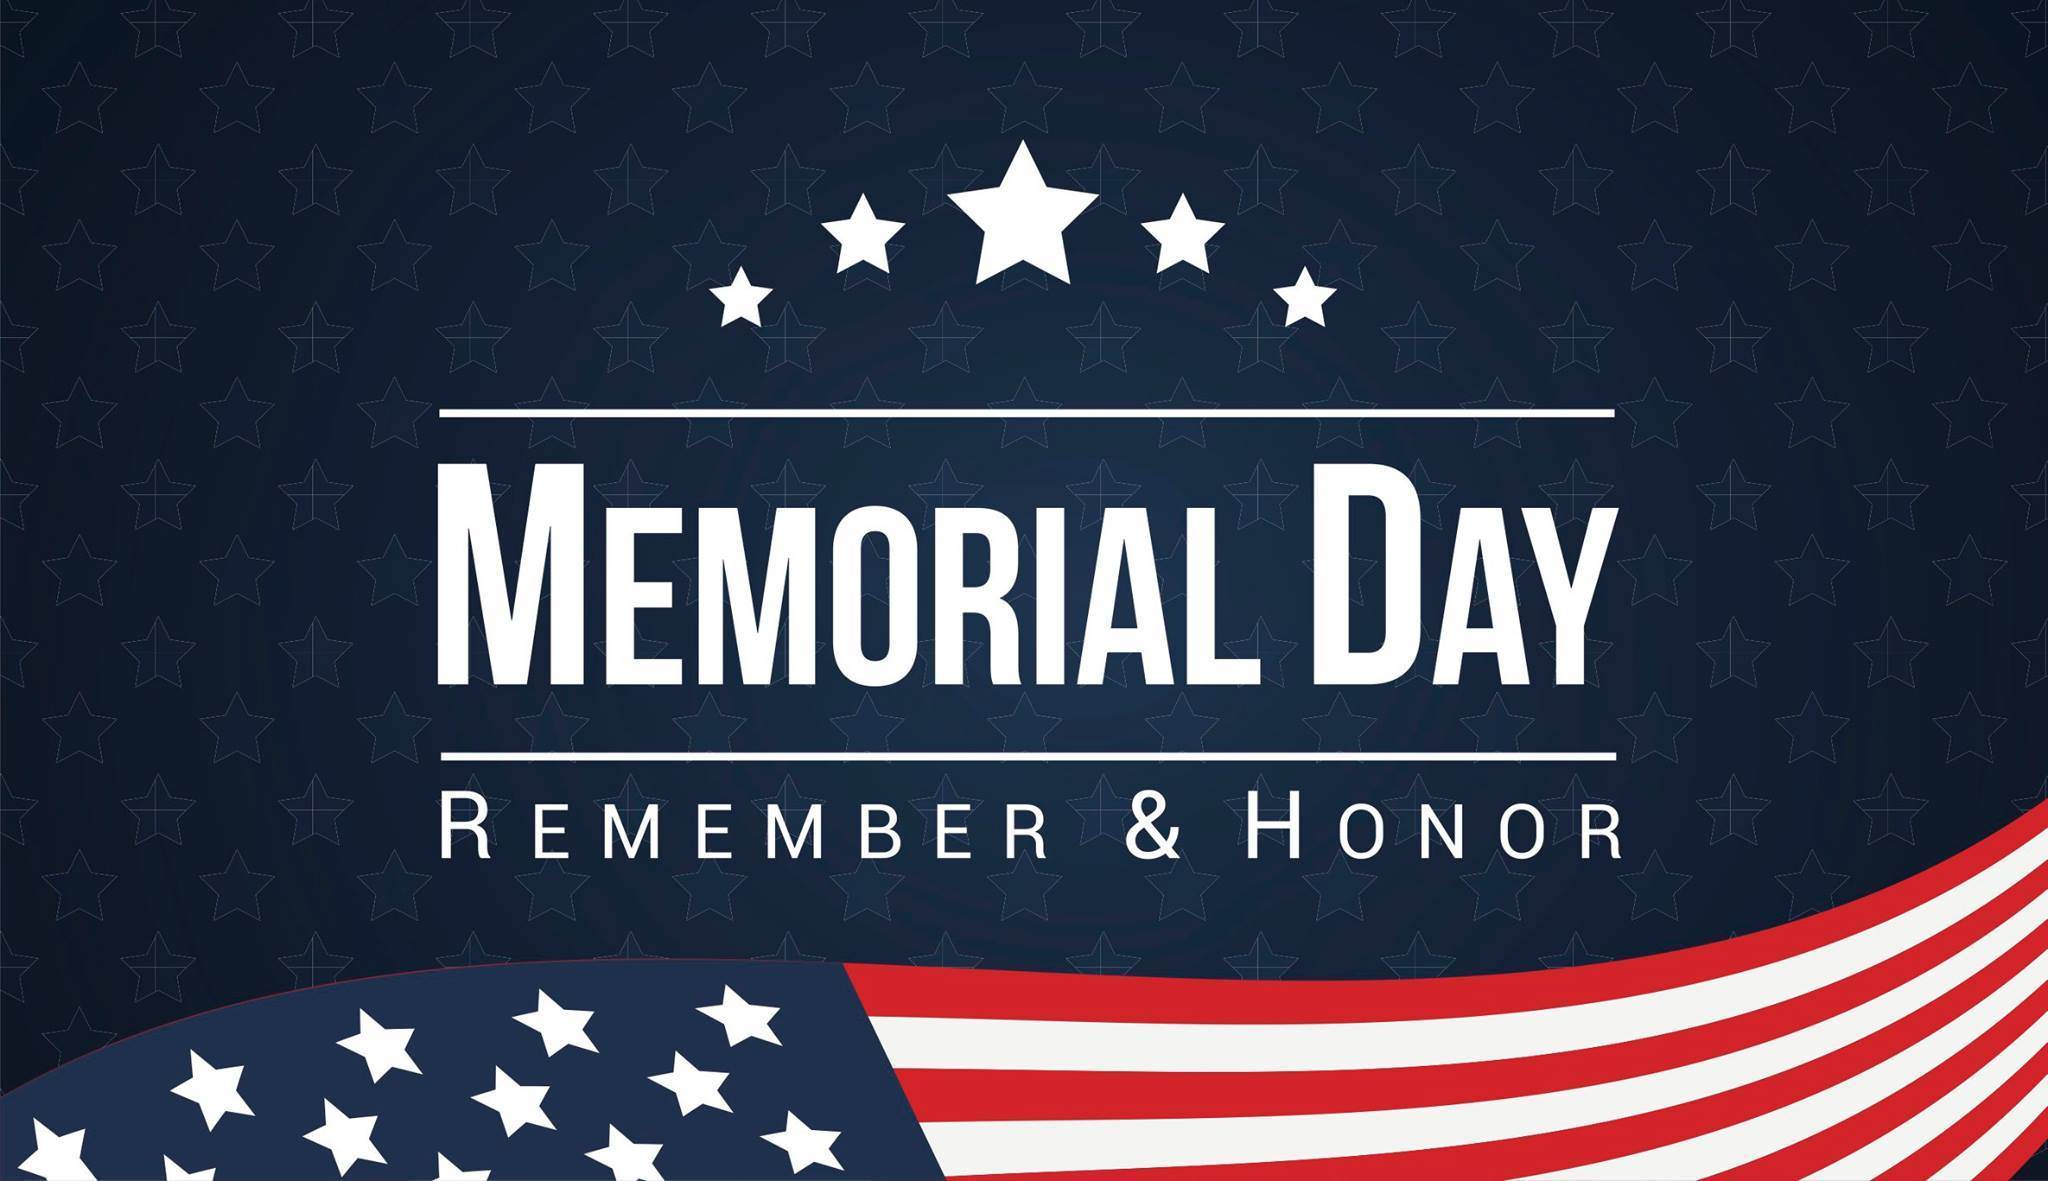 Memorial Day quotes, songs & reflections